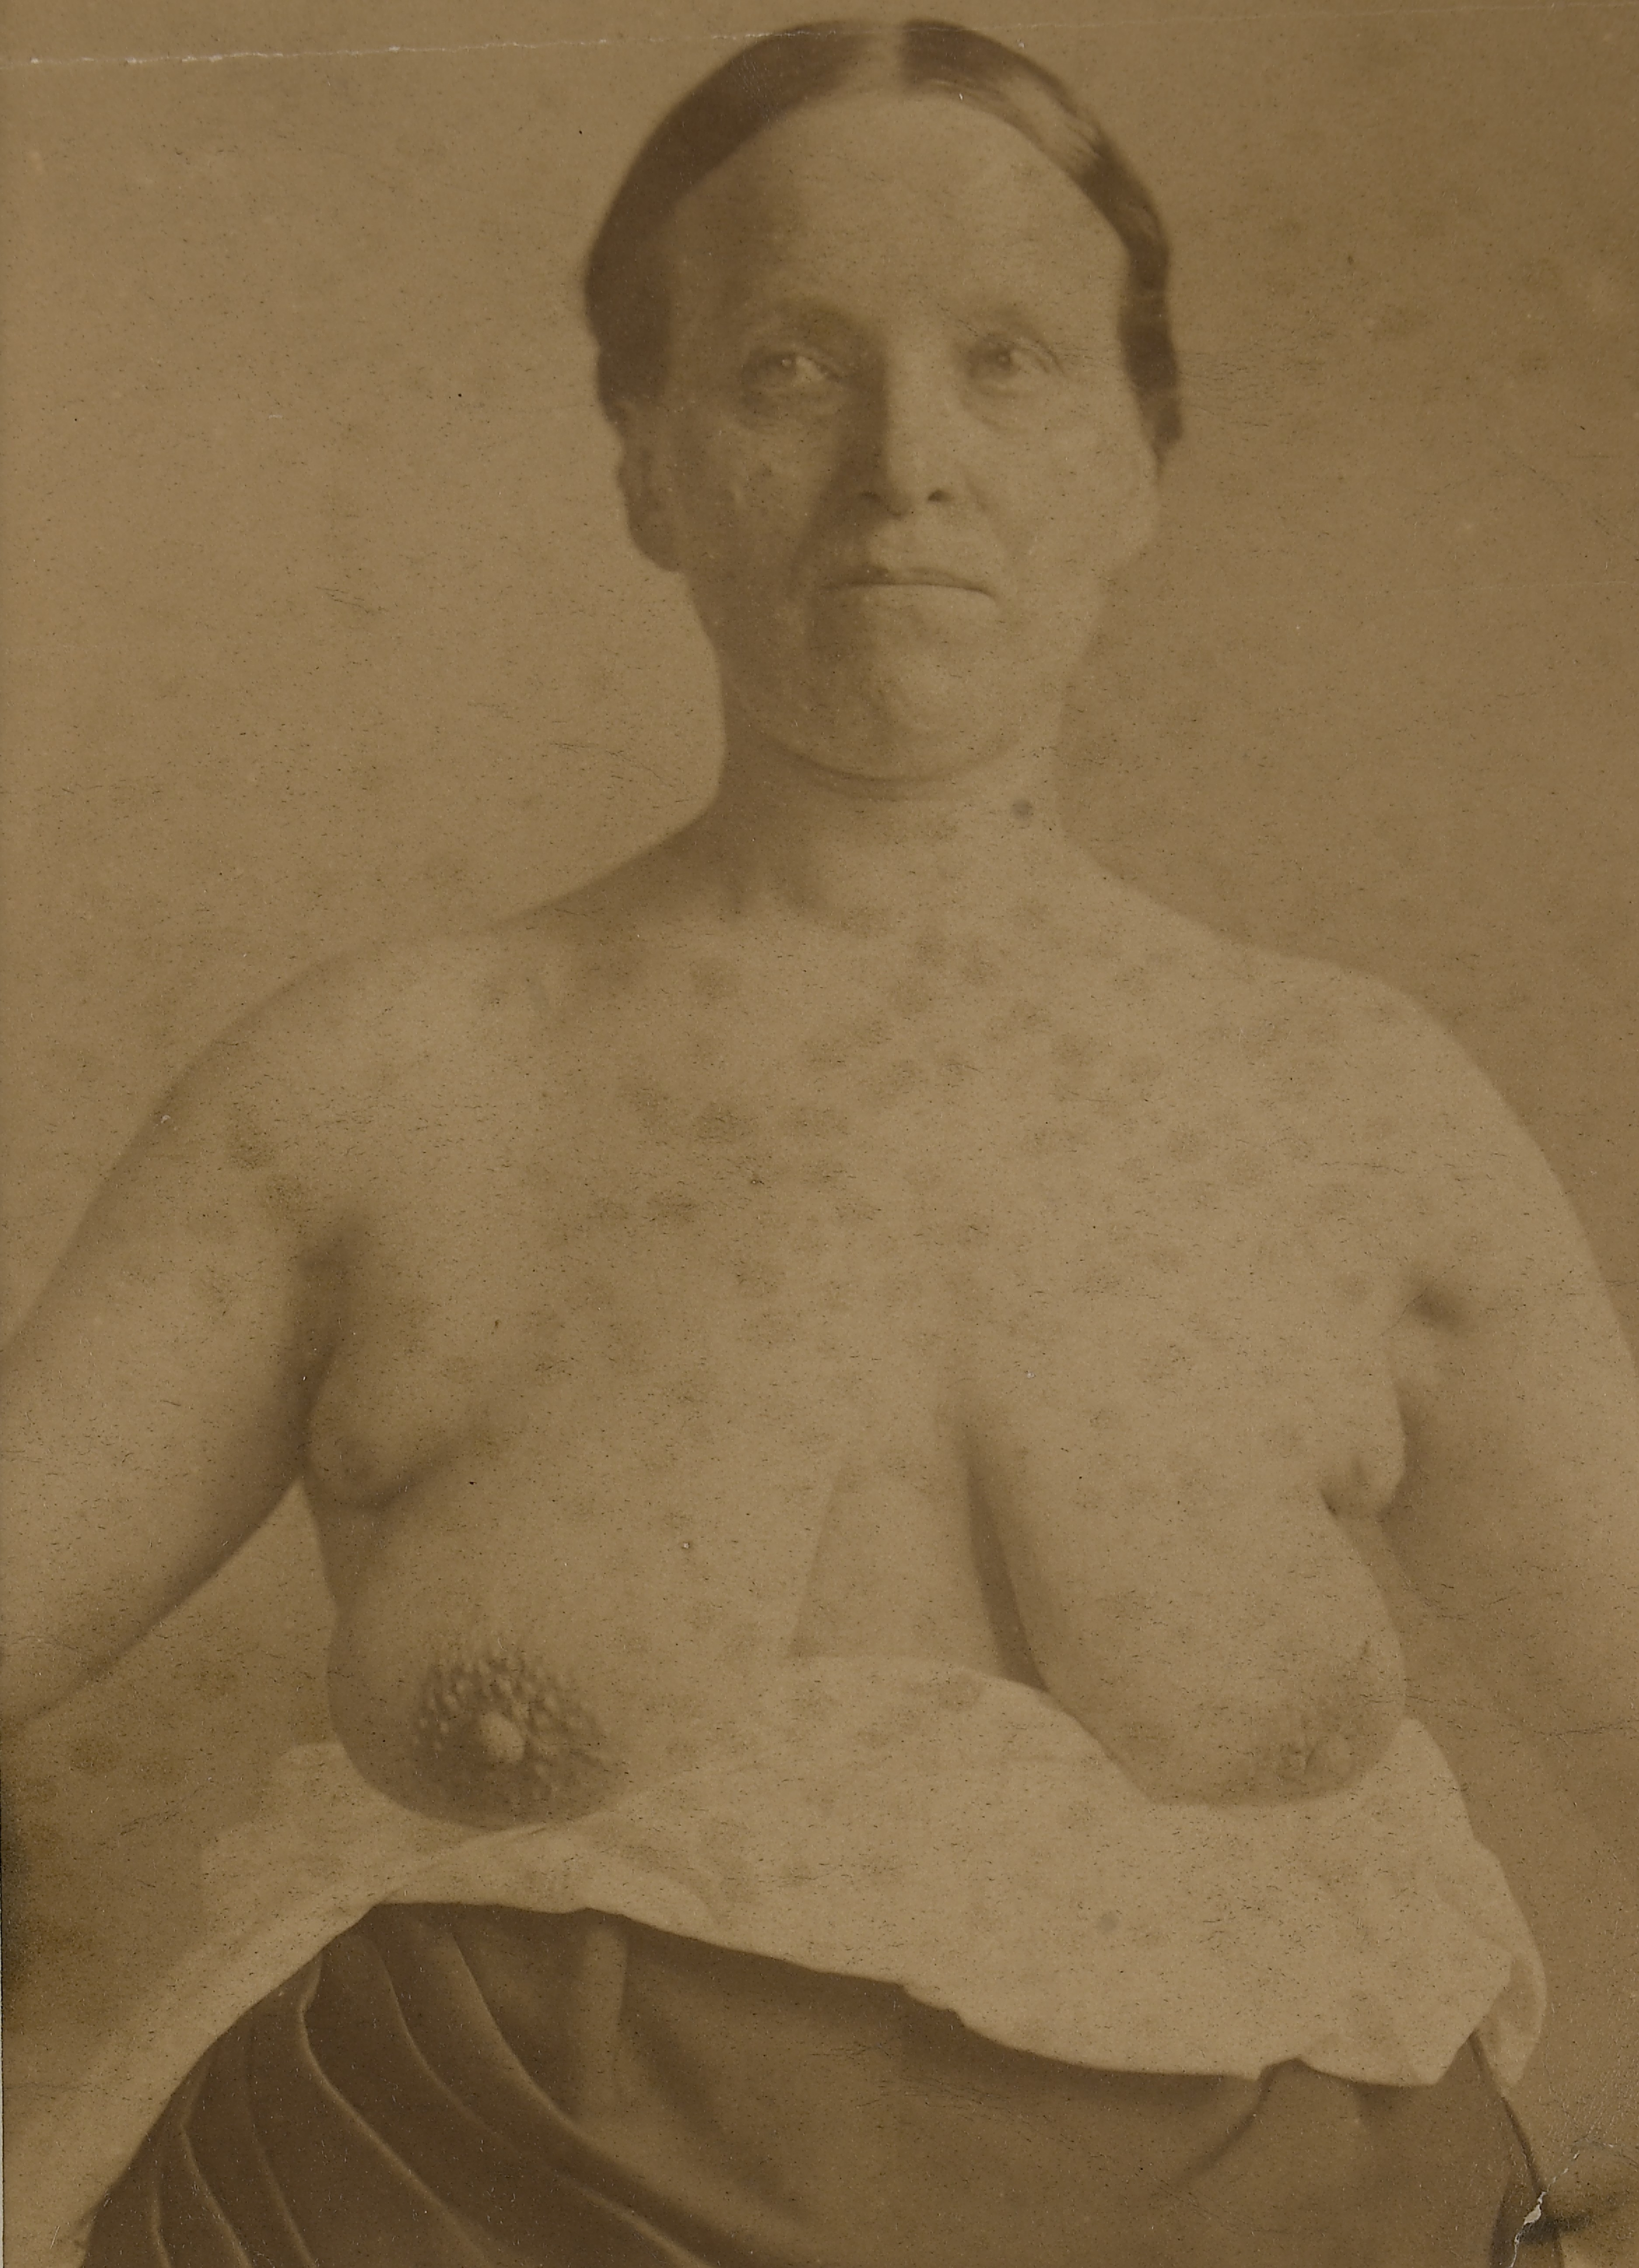 File:Woman with supernumery breasts and nipples Wellcome L0062997.jpg -  Wikimedia Commons